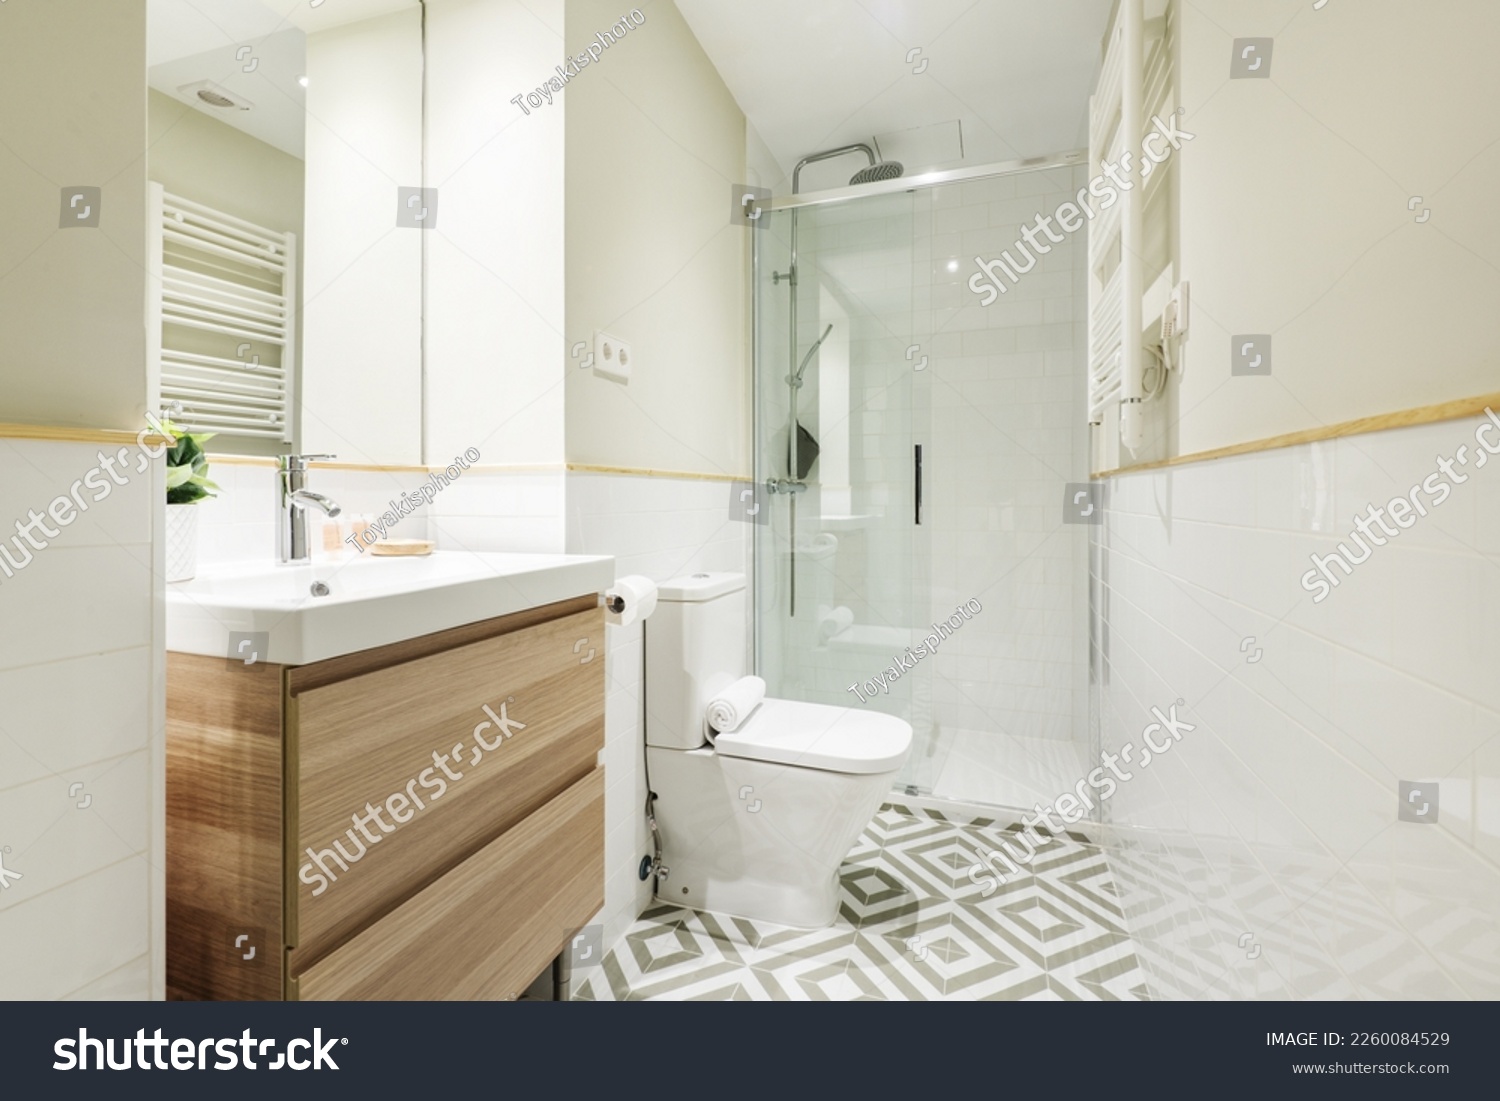 Newly renovated bathroom with small wooden cabinet with drawers and white porcelain sink, shower cabin with glass screen, mirror integrated into the wall and decorative plant #2260084529